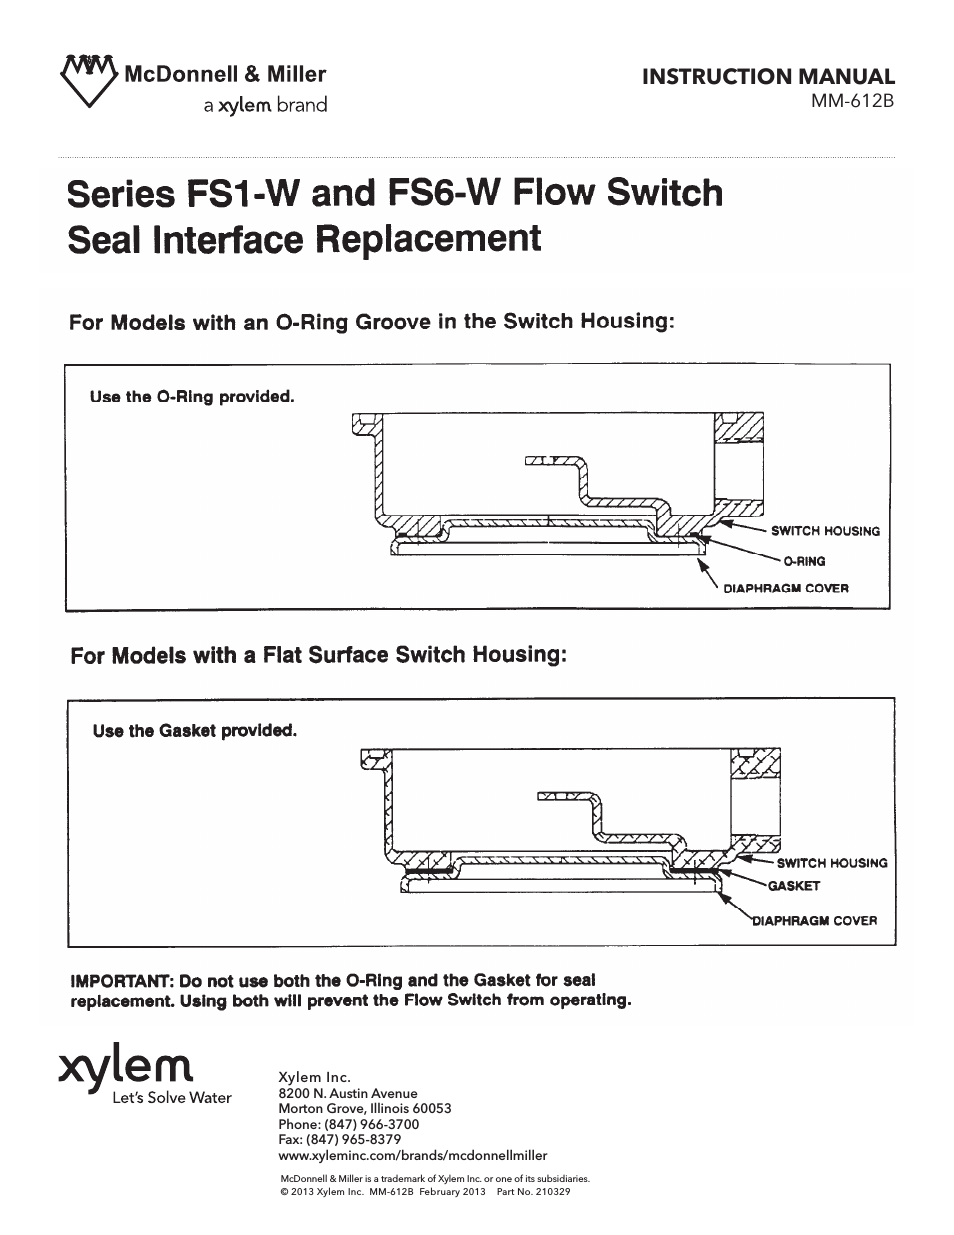 MM 612B Series FS1-W and FS6-W Flow Switch Seal Interface Replacement